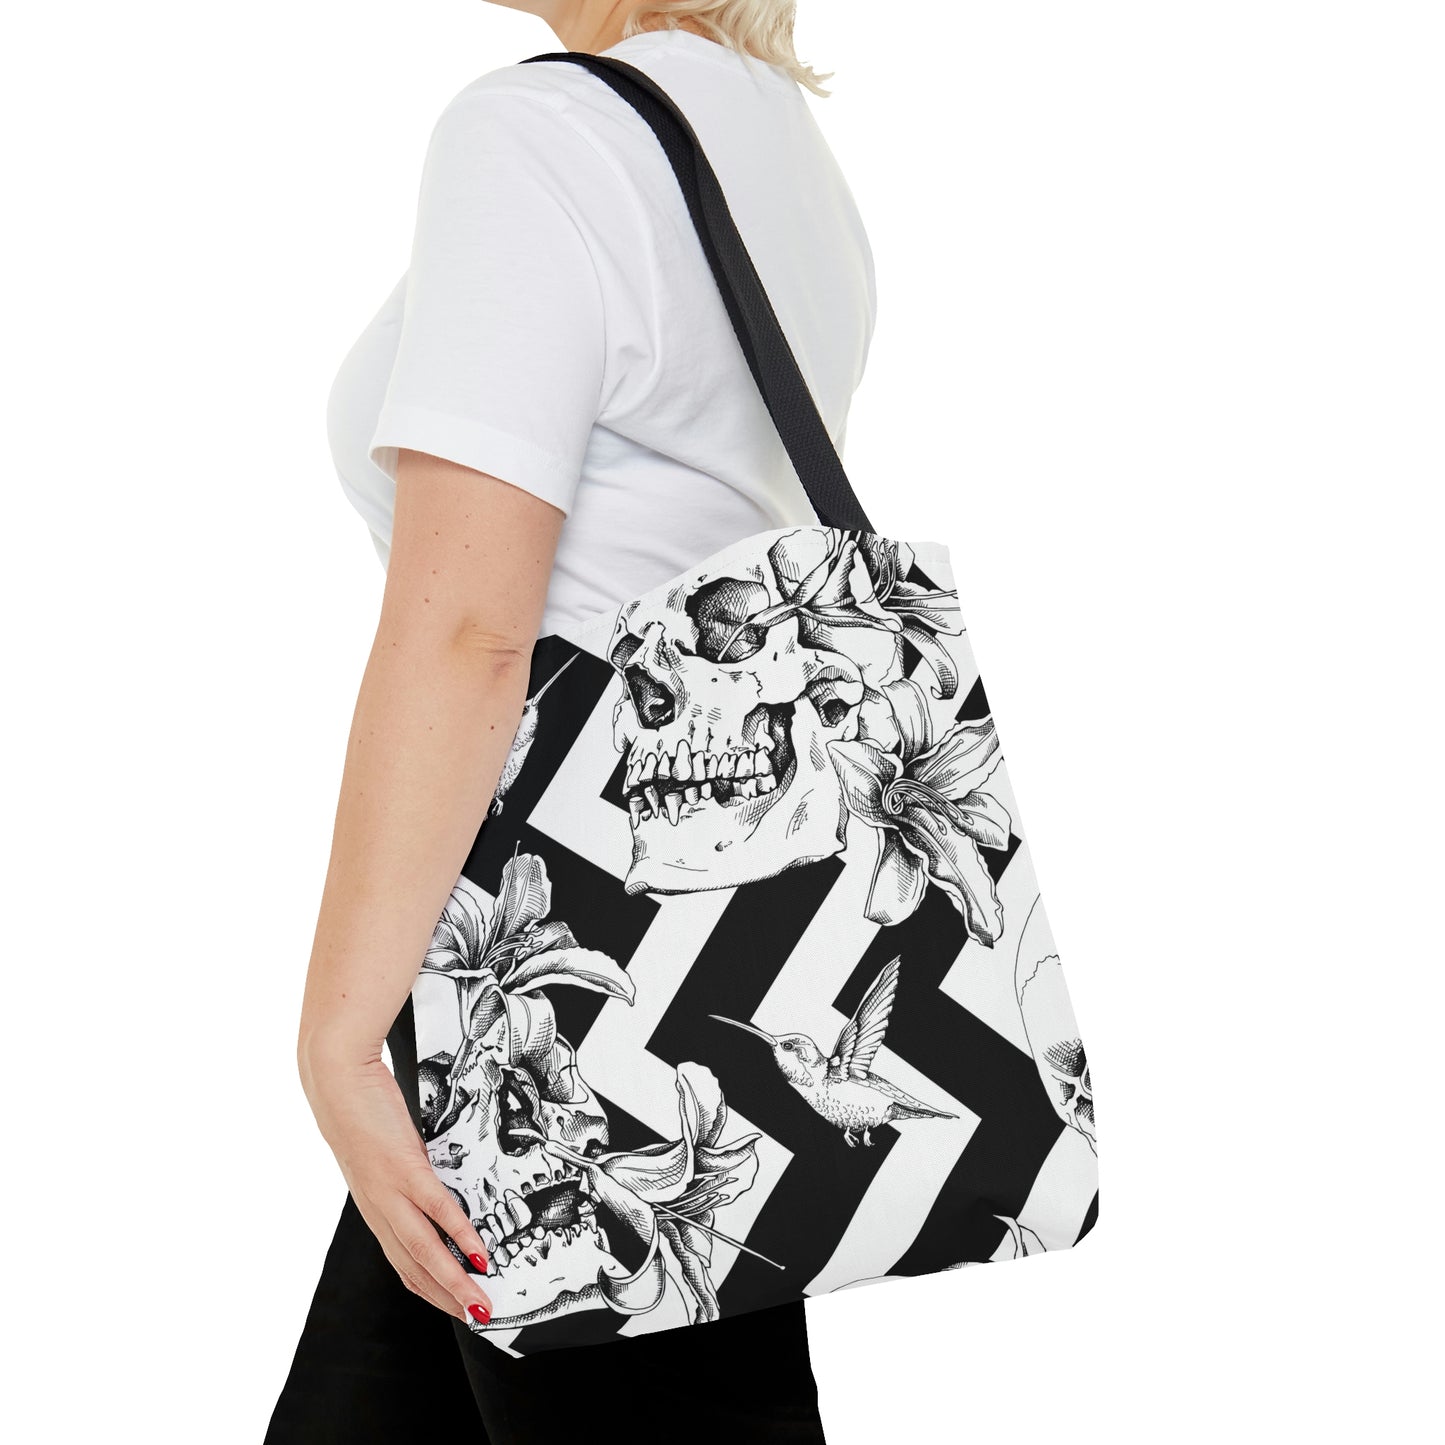 AOP Tote Bag "Human skulls with exotic flowers and bird on the geometric background"